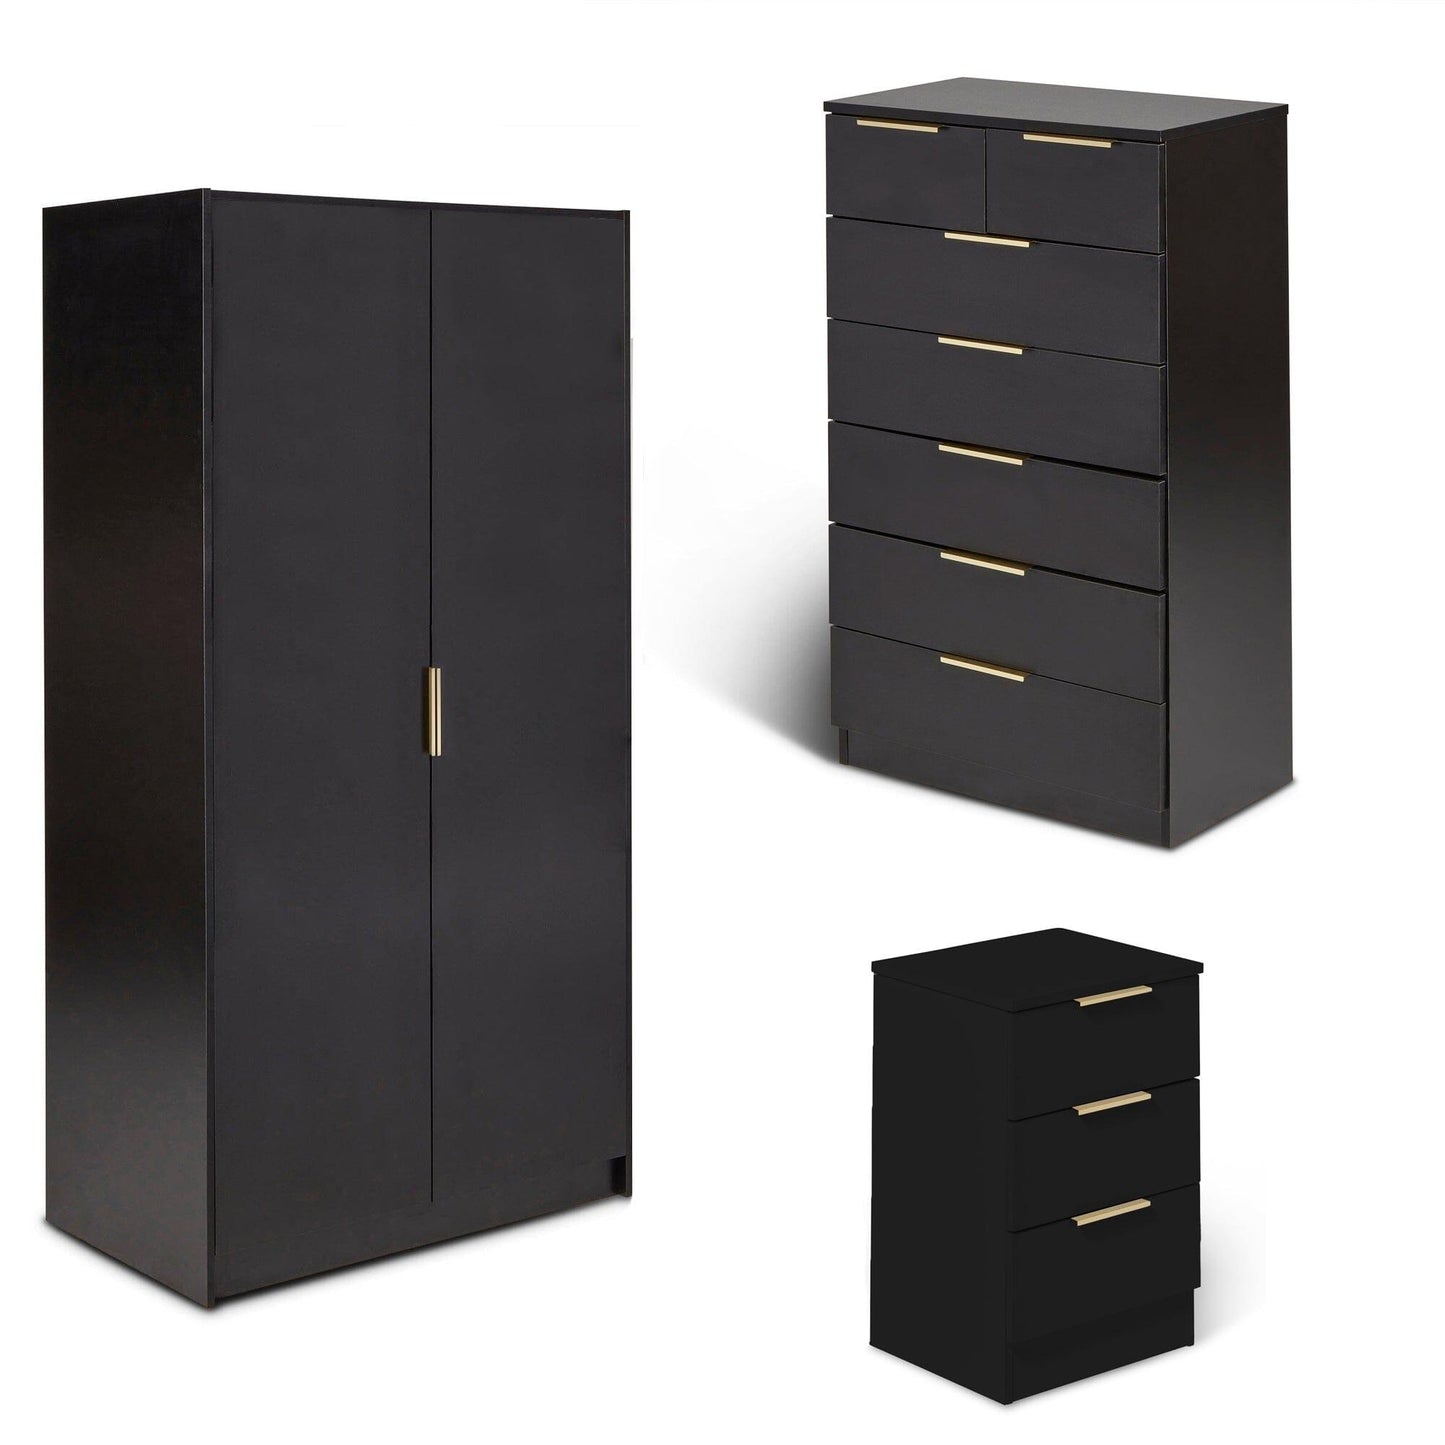 Essie 3 Piece Bedroom Set - 2 over 5 Chest of Drawers - Pitch Black